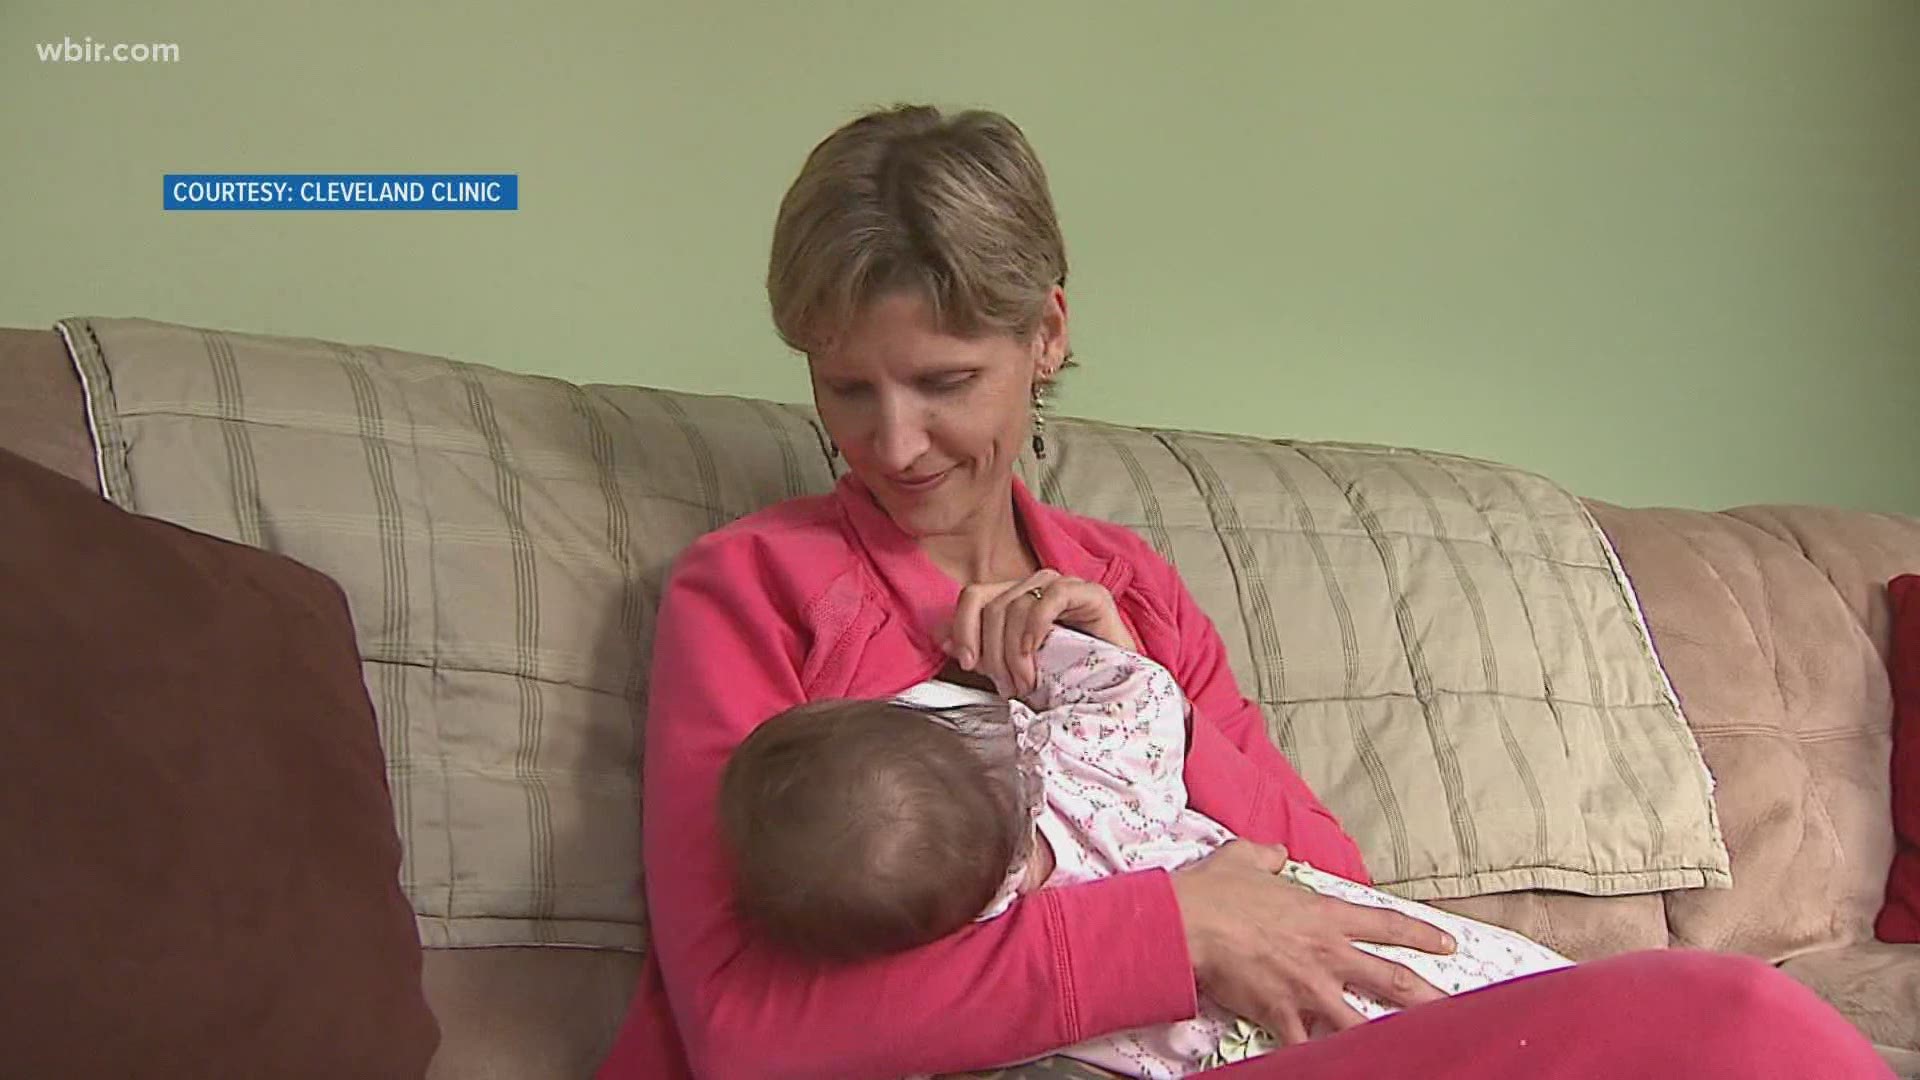 New research shows the merits of breastfeeding for babies and moms.